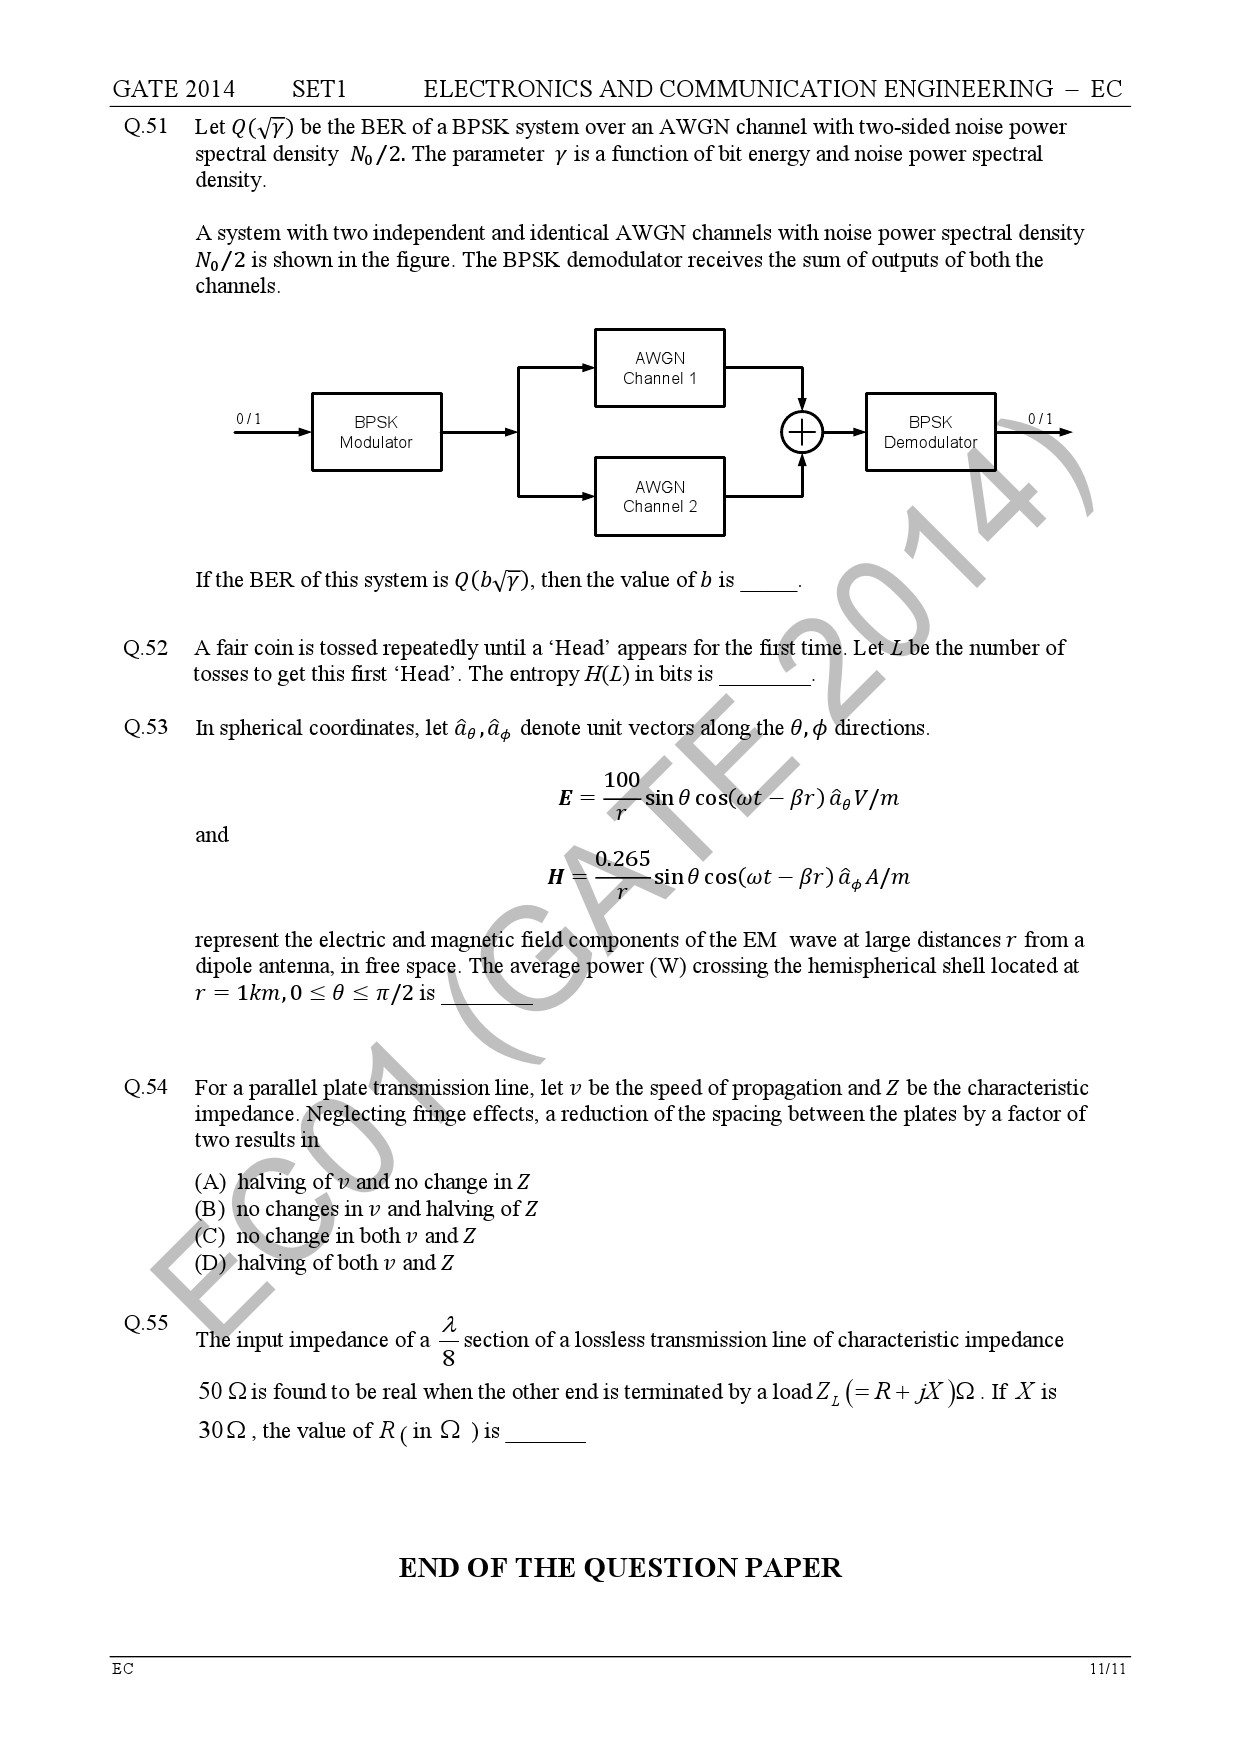 GATE Exam Question Paper 2014 Electronics and Communication Engineering Set 1 17